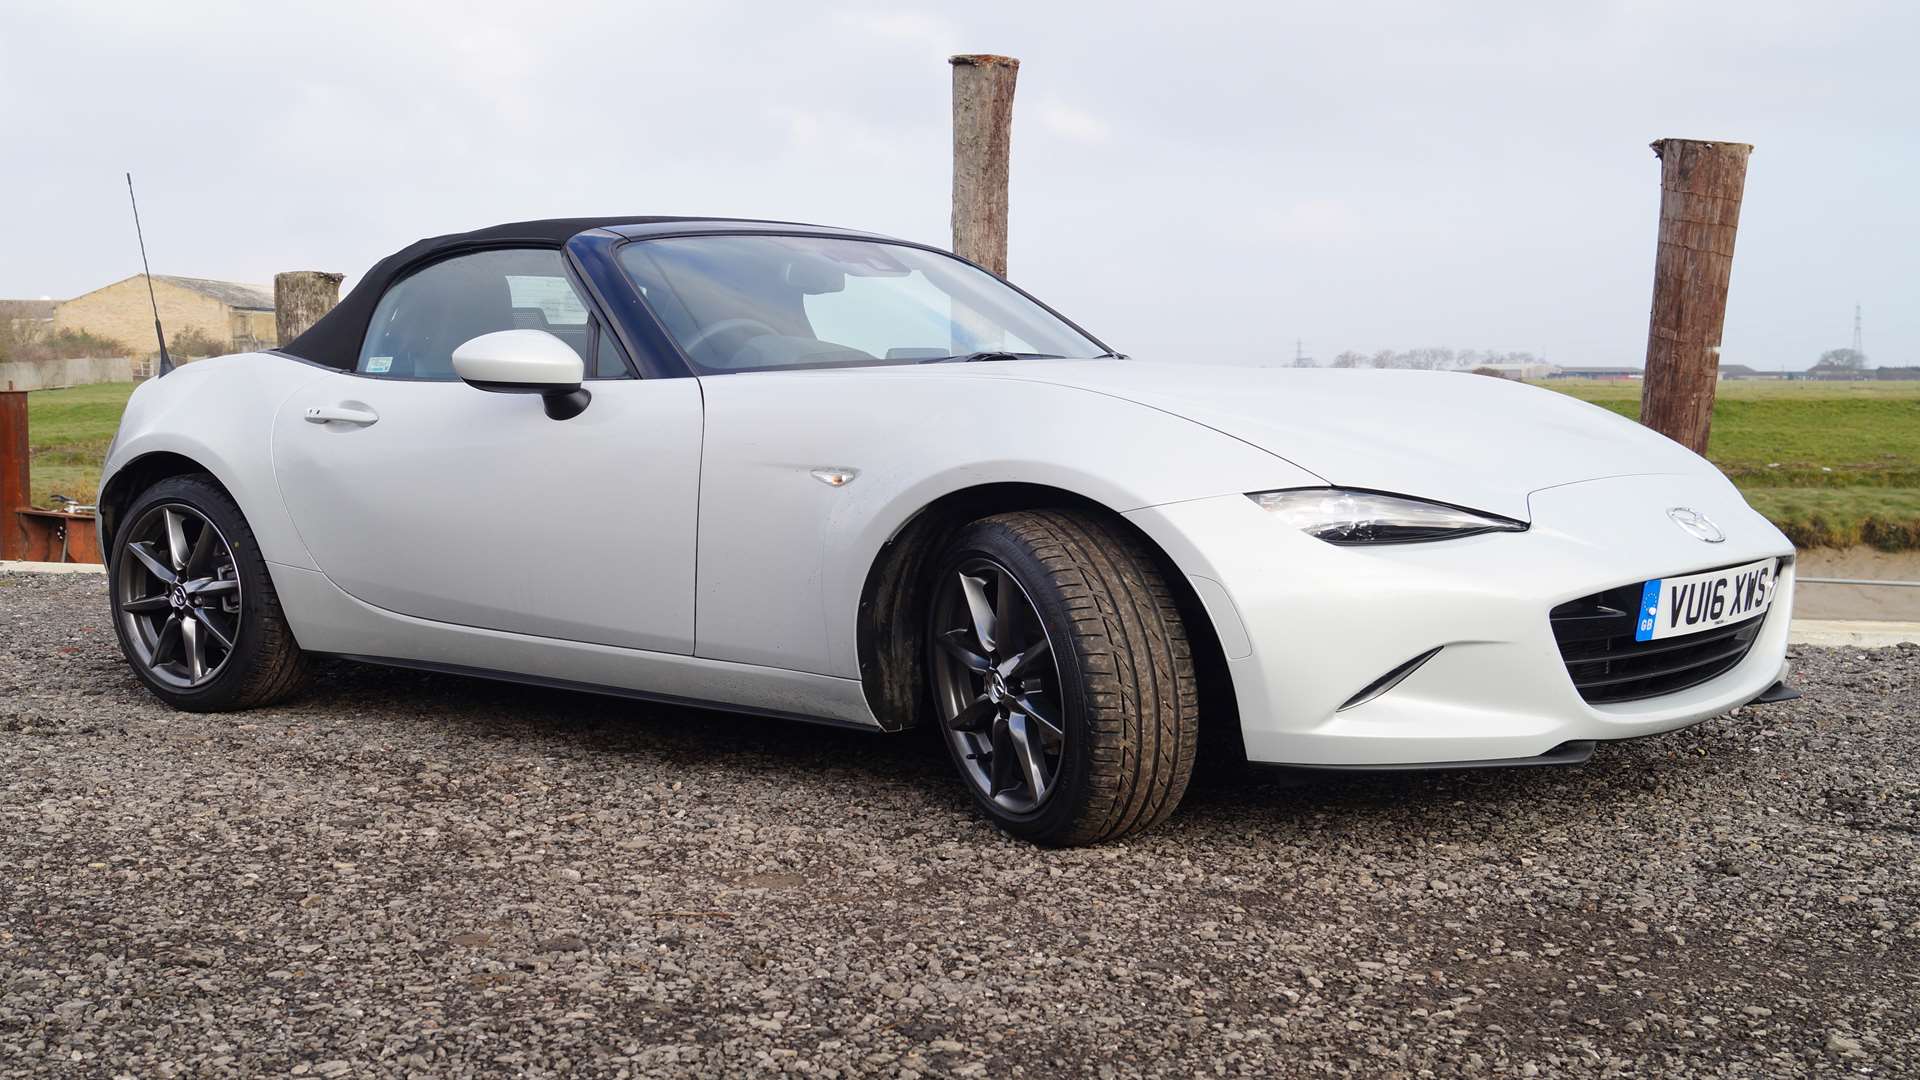 Mazda have been busy trimming the fat off the MX-5